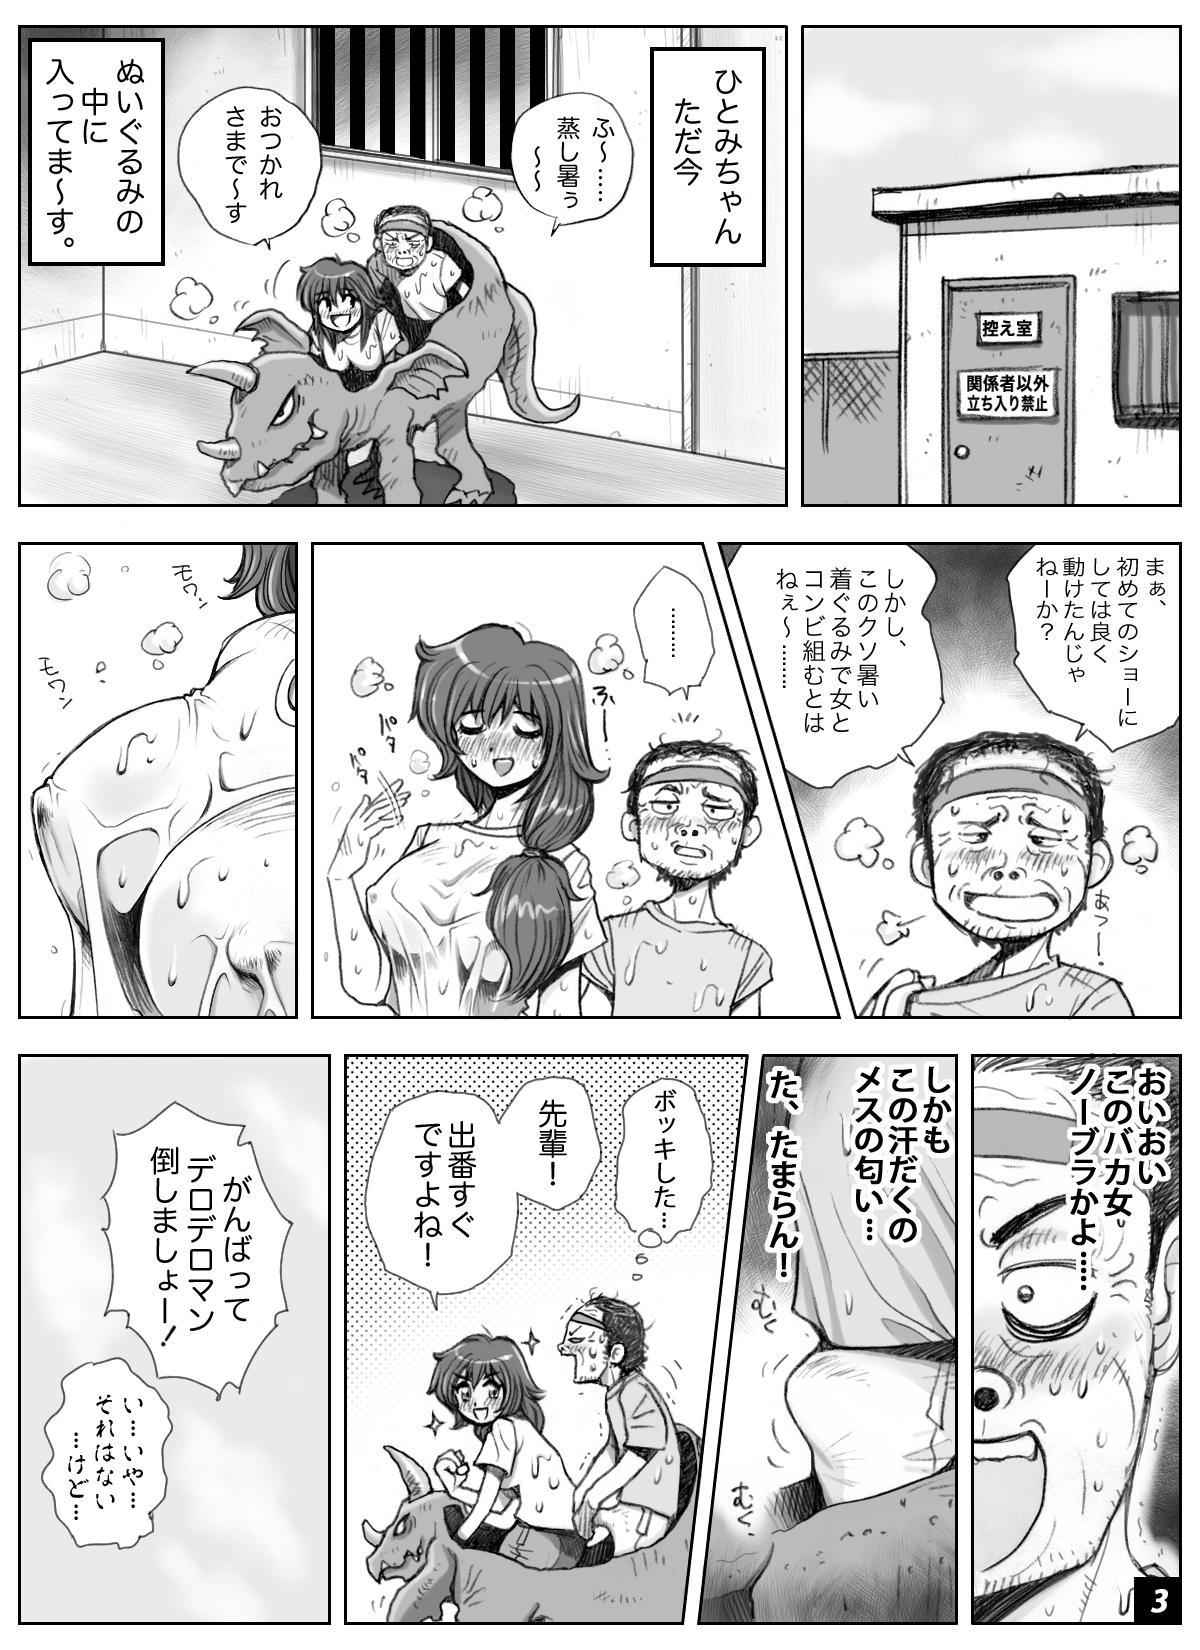 Stepfather ikeikeフリーター ひとみちゃん Vol.6 Sexo - Page 3